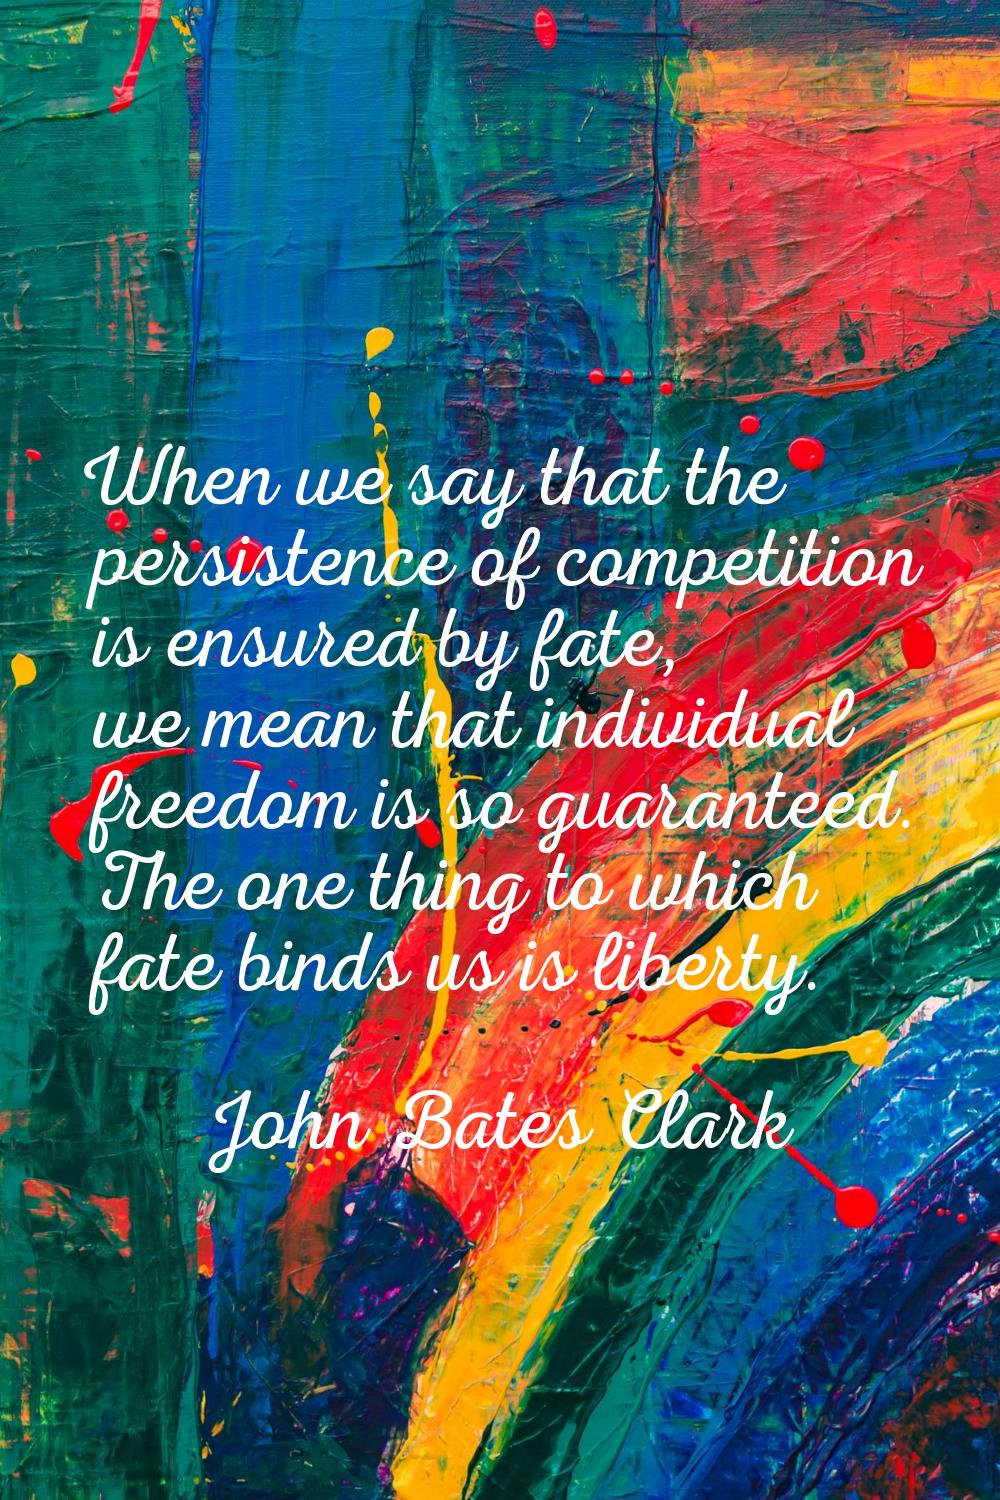 When we say that the persistence of competition is ensured by fate, we mean that individual freedom